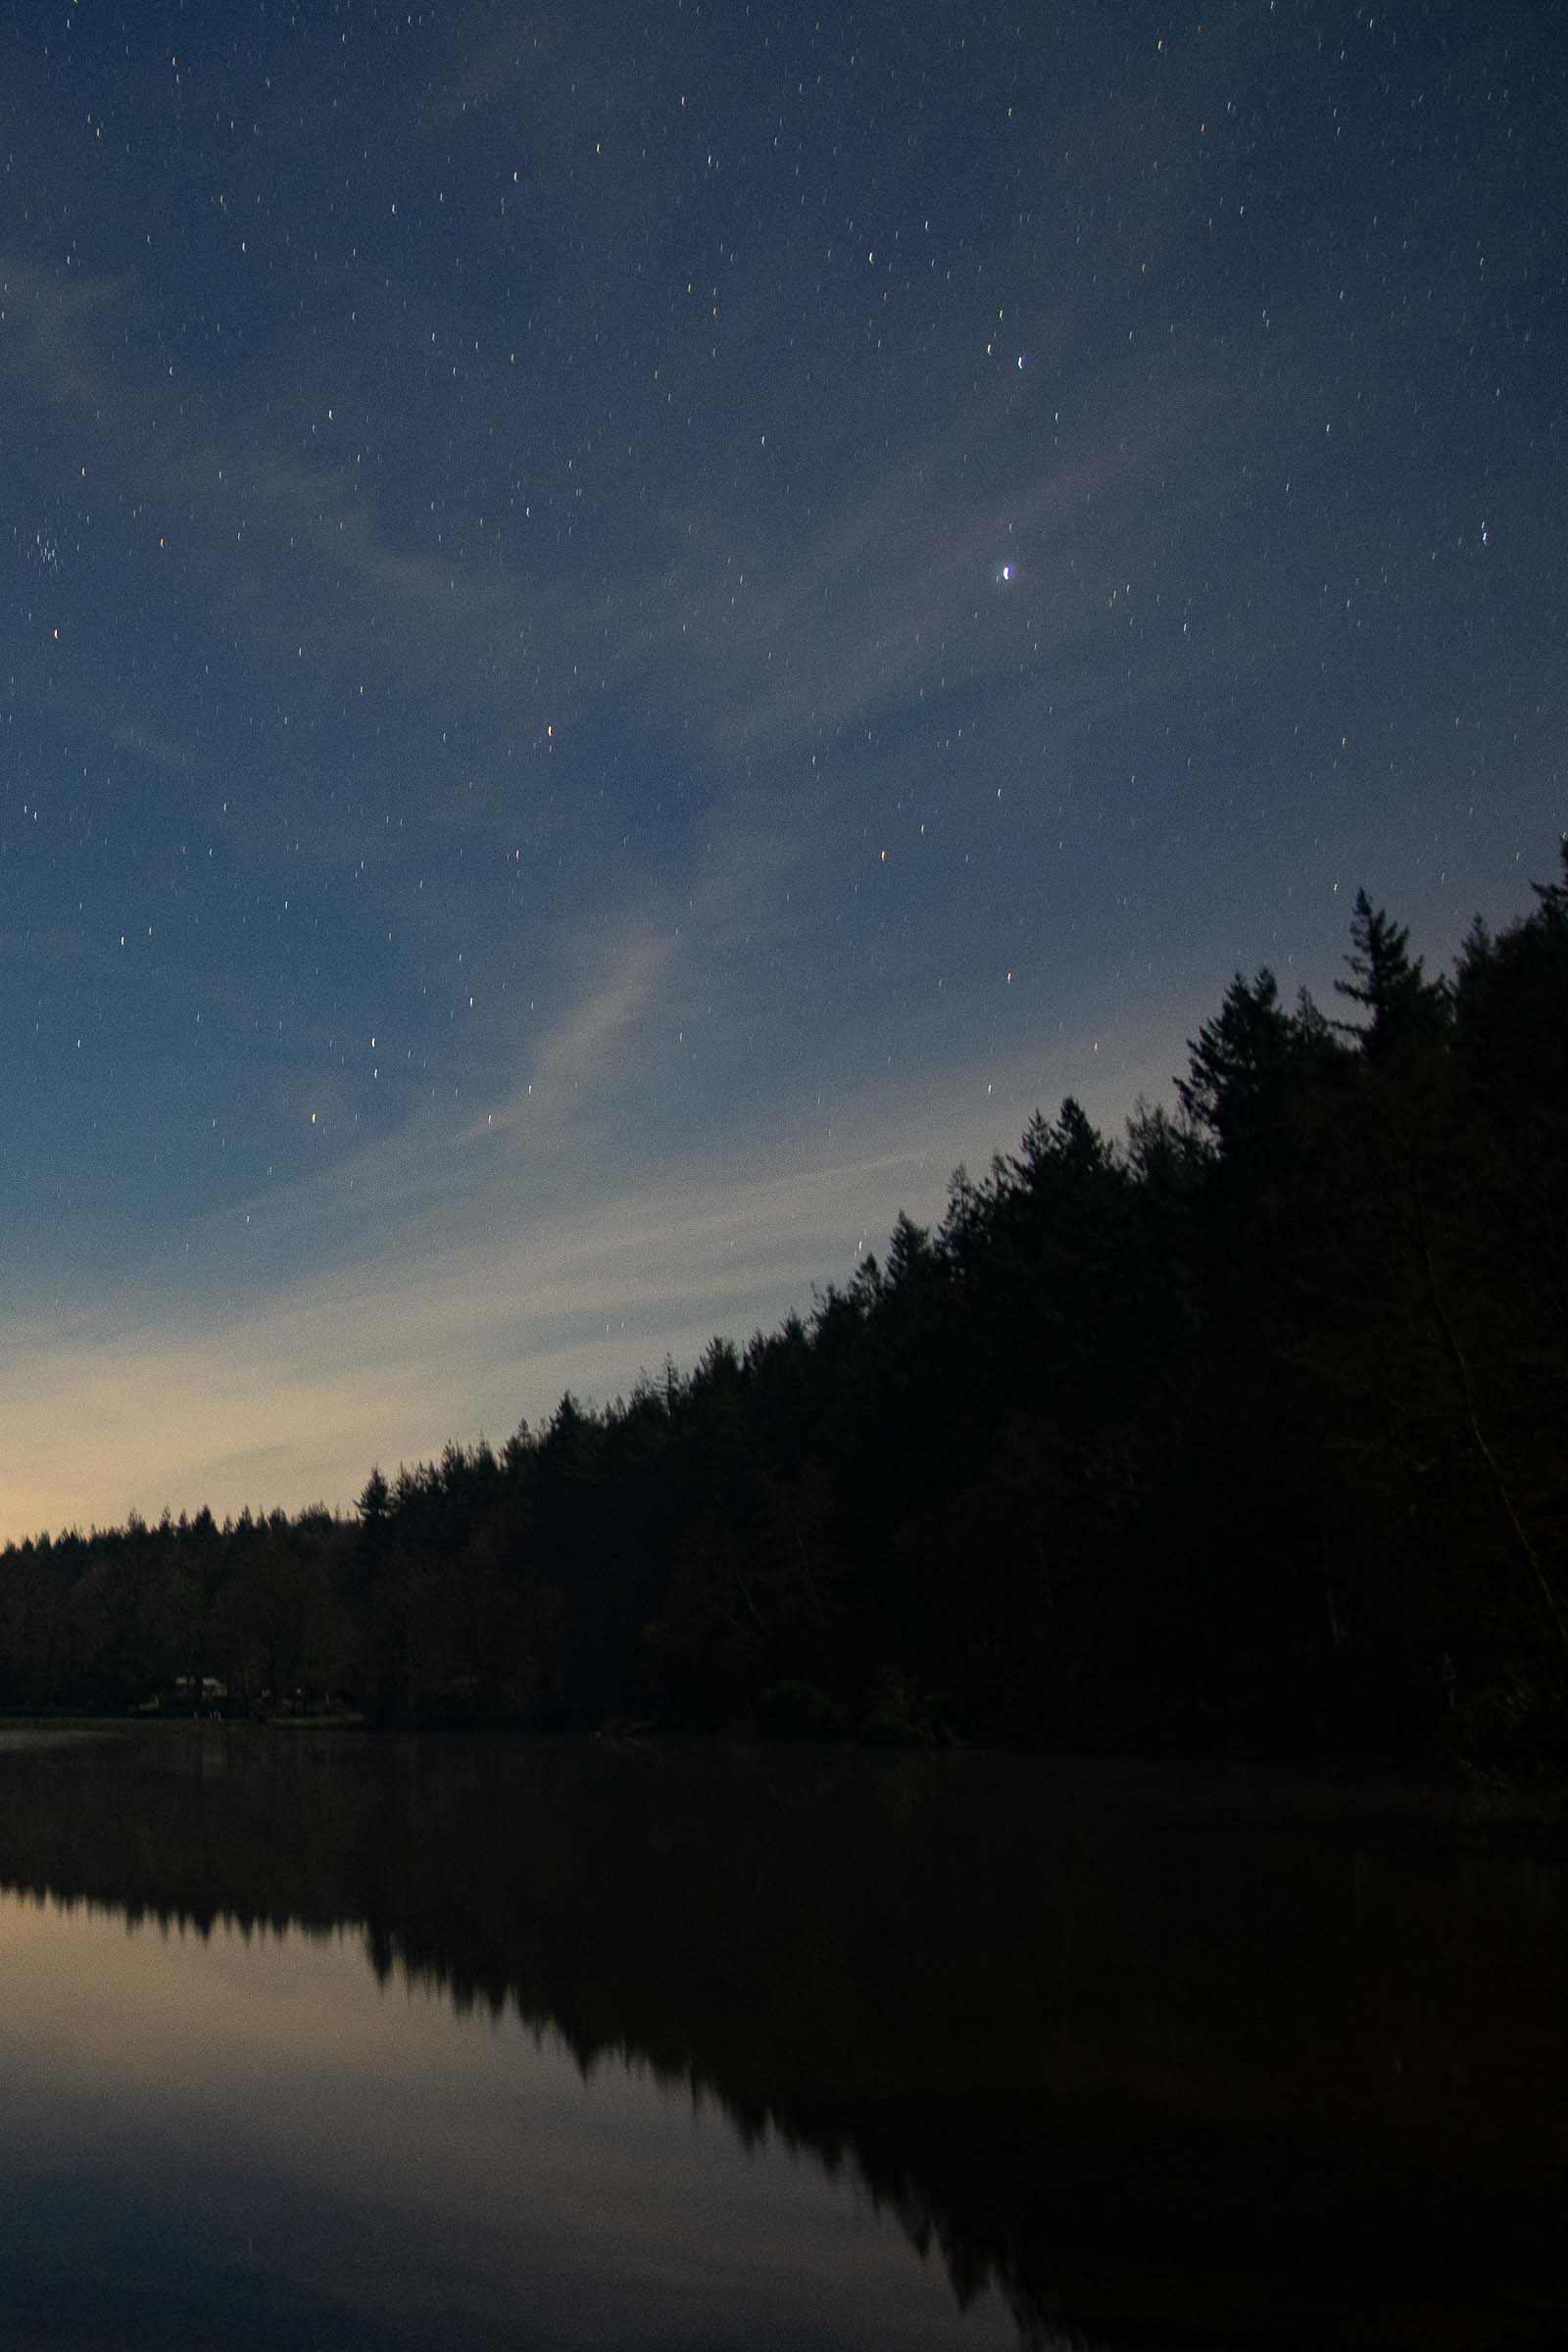 Astrophotography using the Canon EOS R6 showing night sky over forest